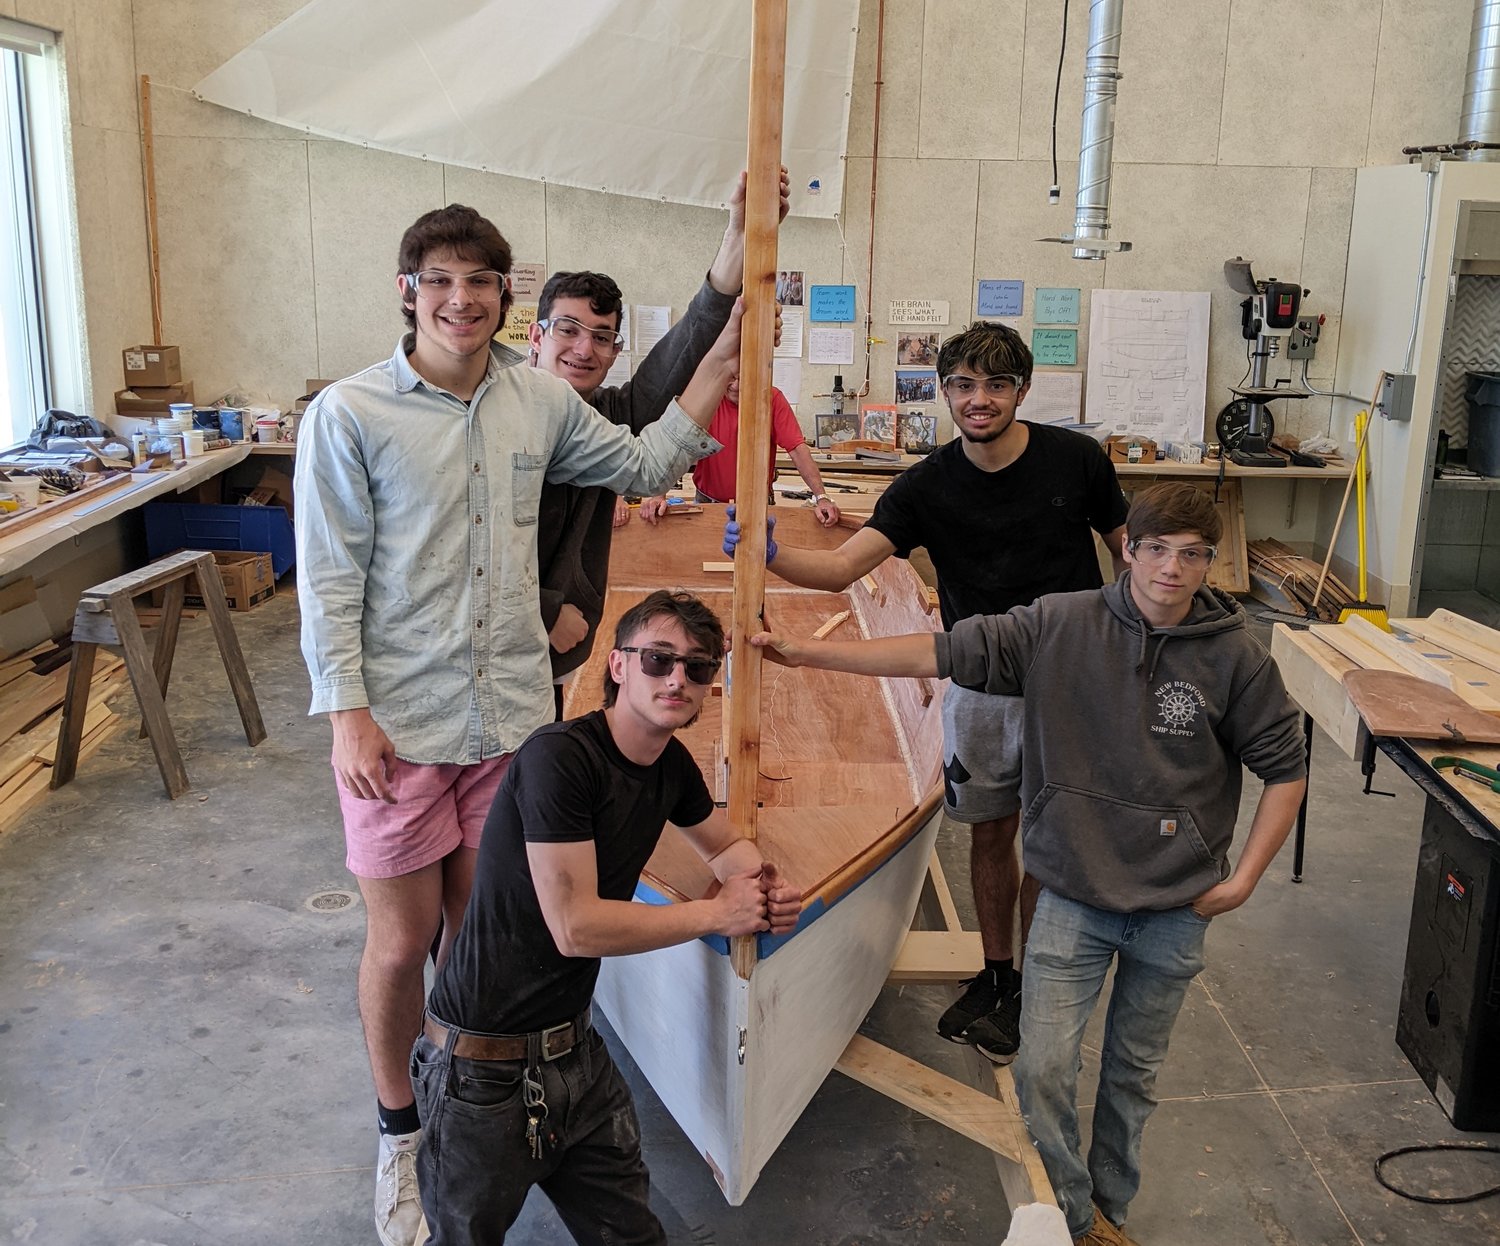 Students Riley Flannagan, Ben Poitras, Zander Santos, Matt Smith and Kenny Ferrer seem pleased after they installed Osprey's mast for the first time.